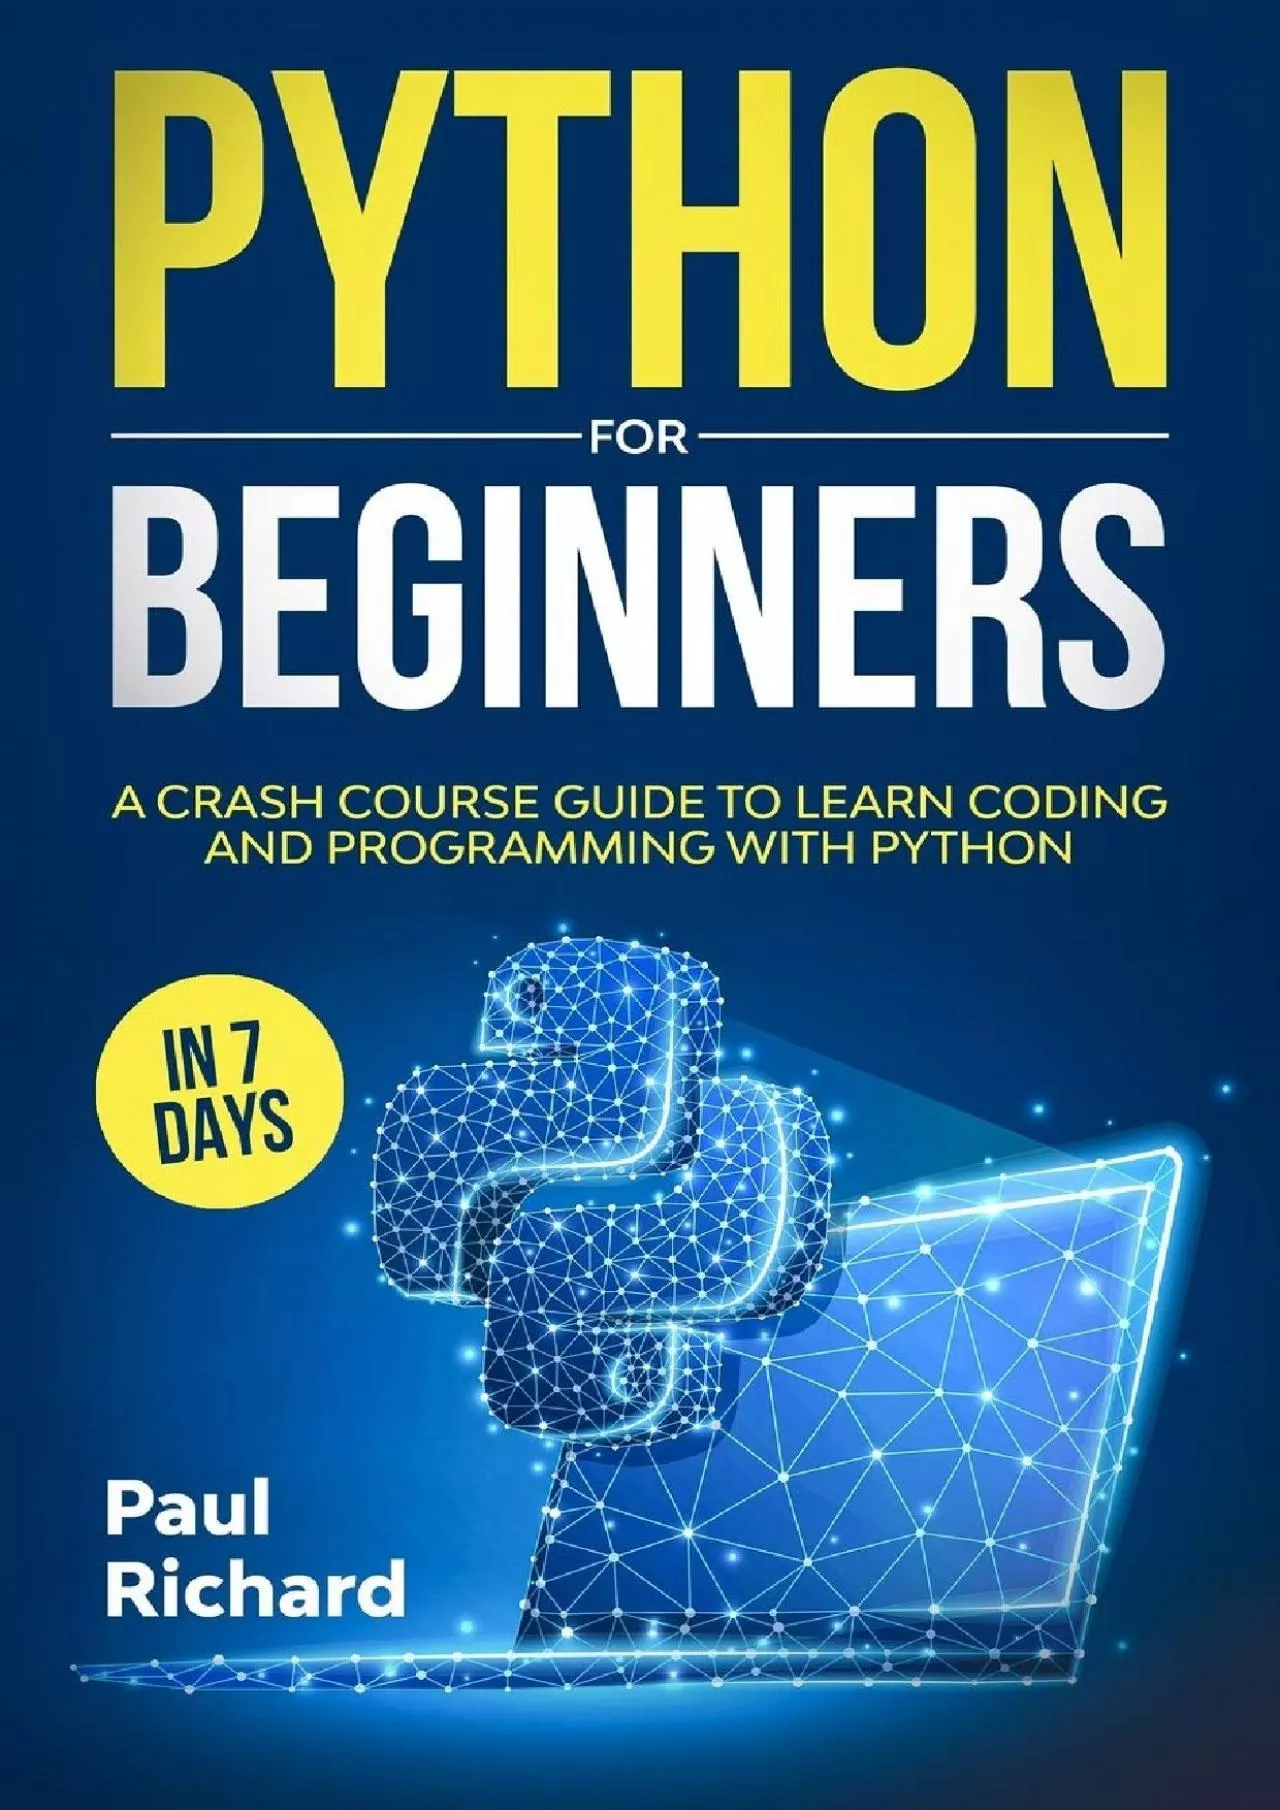 [READING BOOK]-Python for Beginners A Crash Course Guide to Learn Coding and Programming